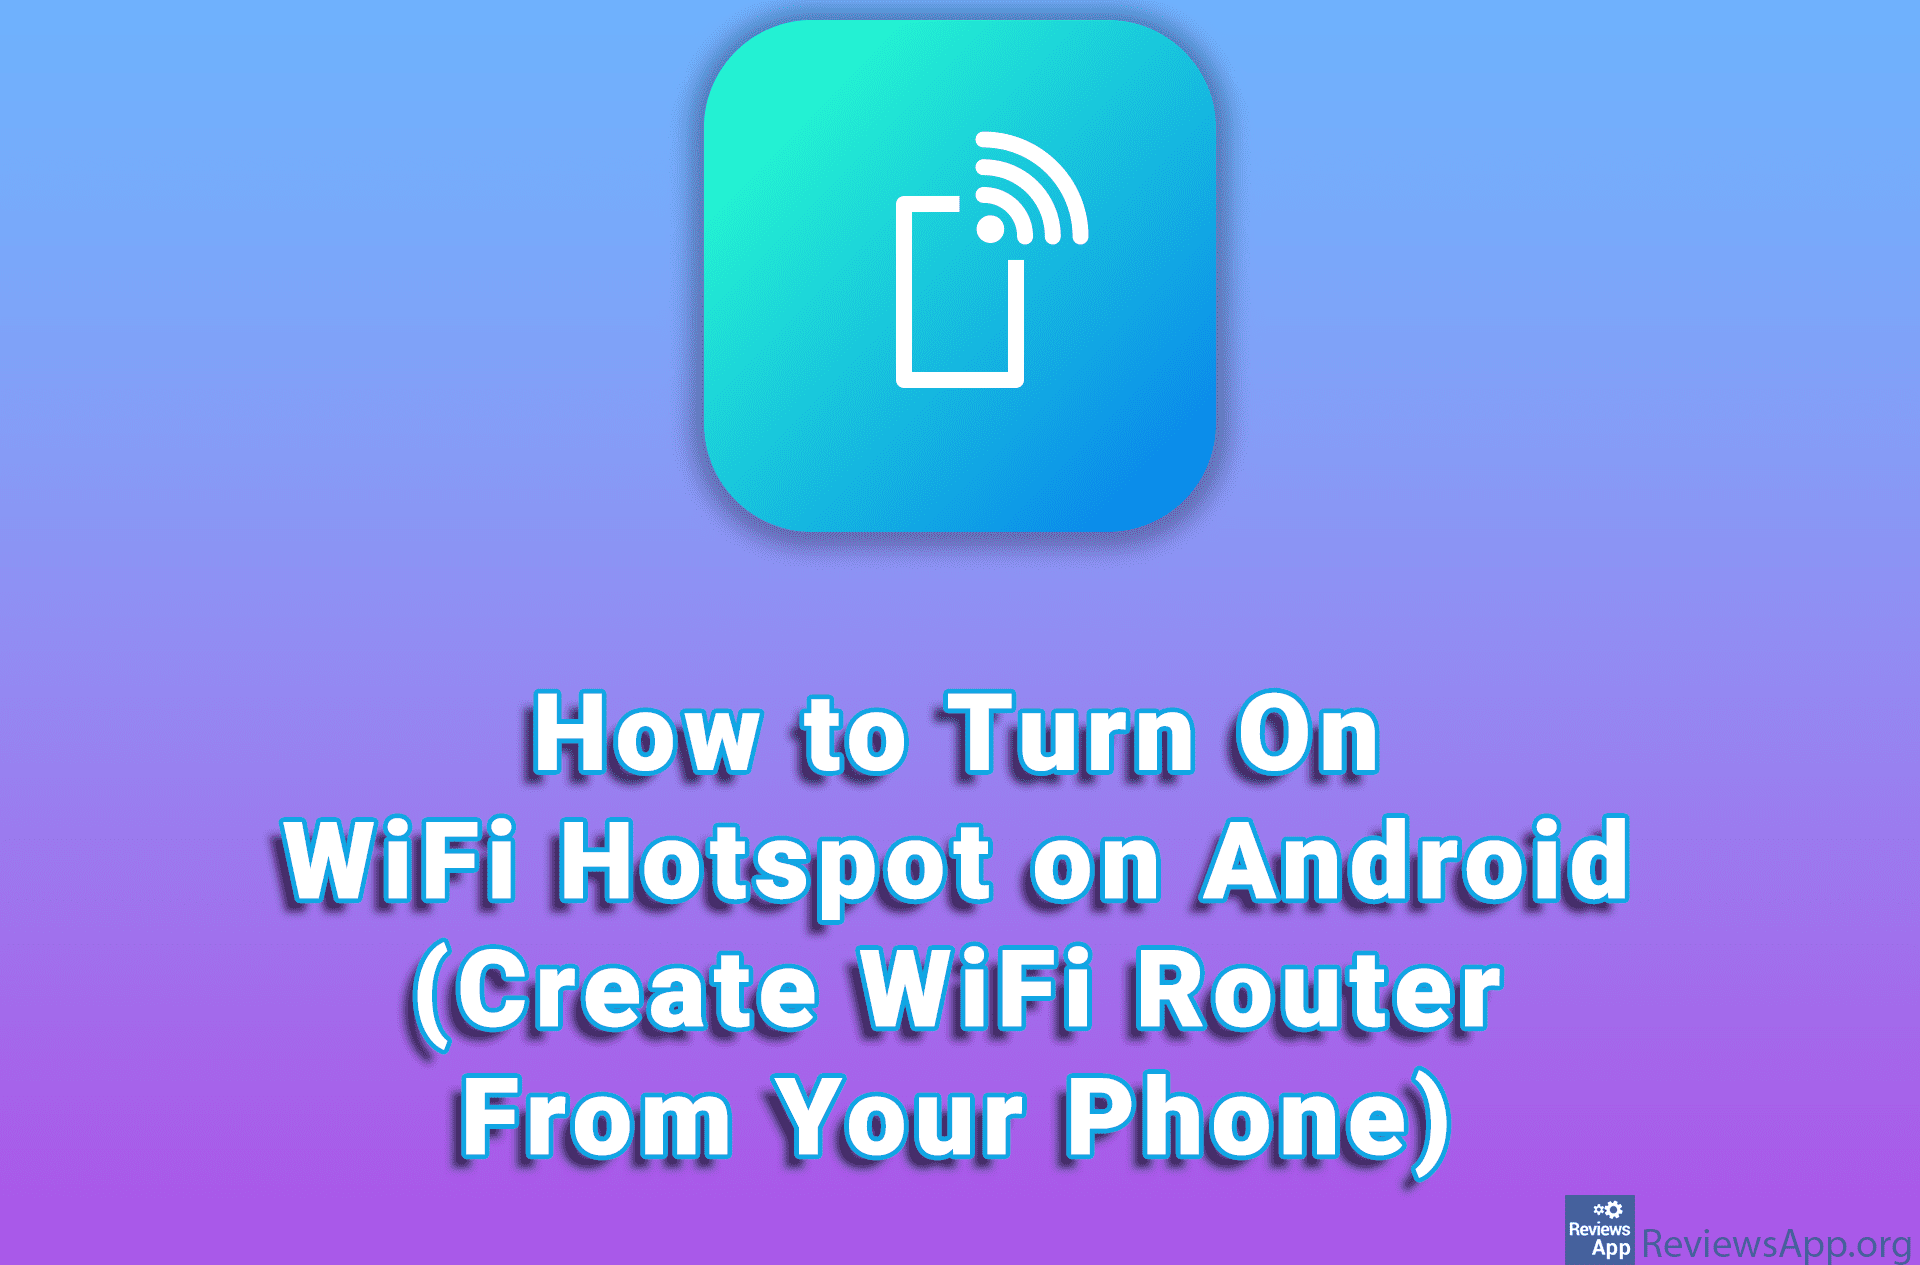 How to Turn On WiFi Hotspot on Android (Create WiFi Router From Your Phone)